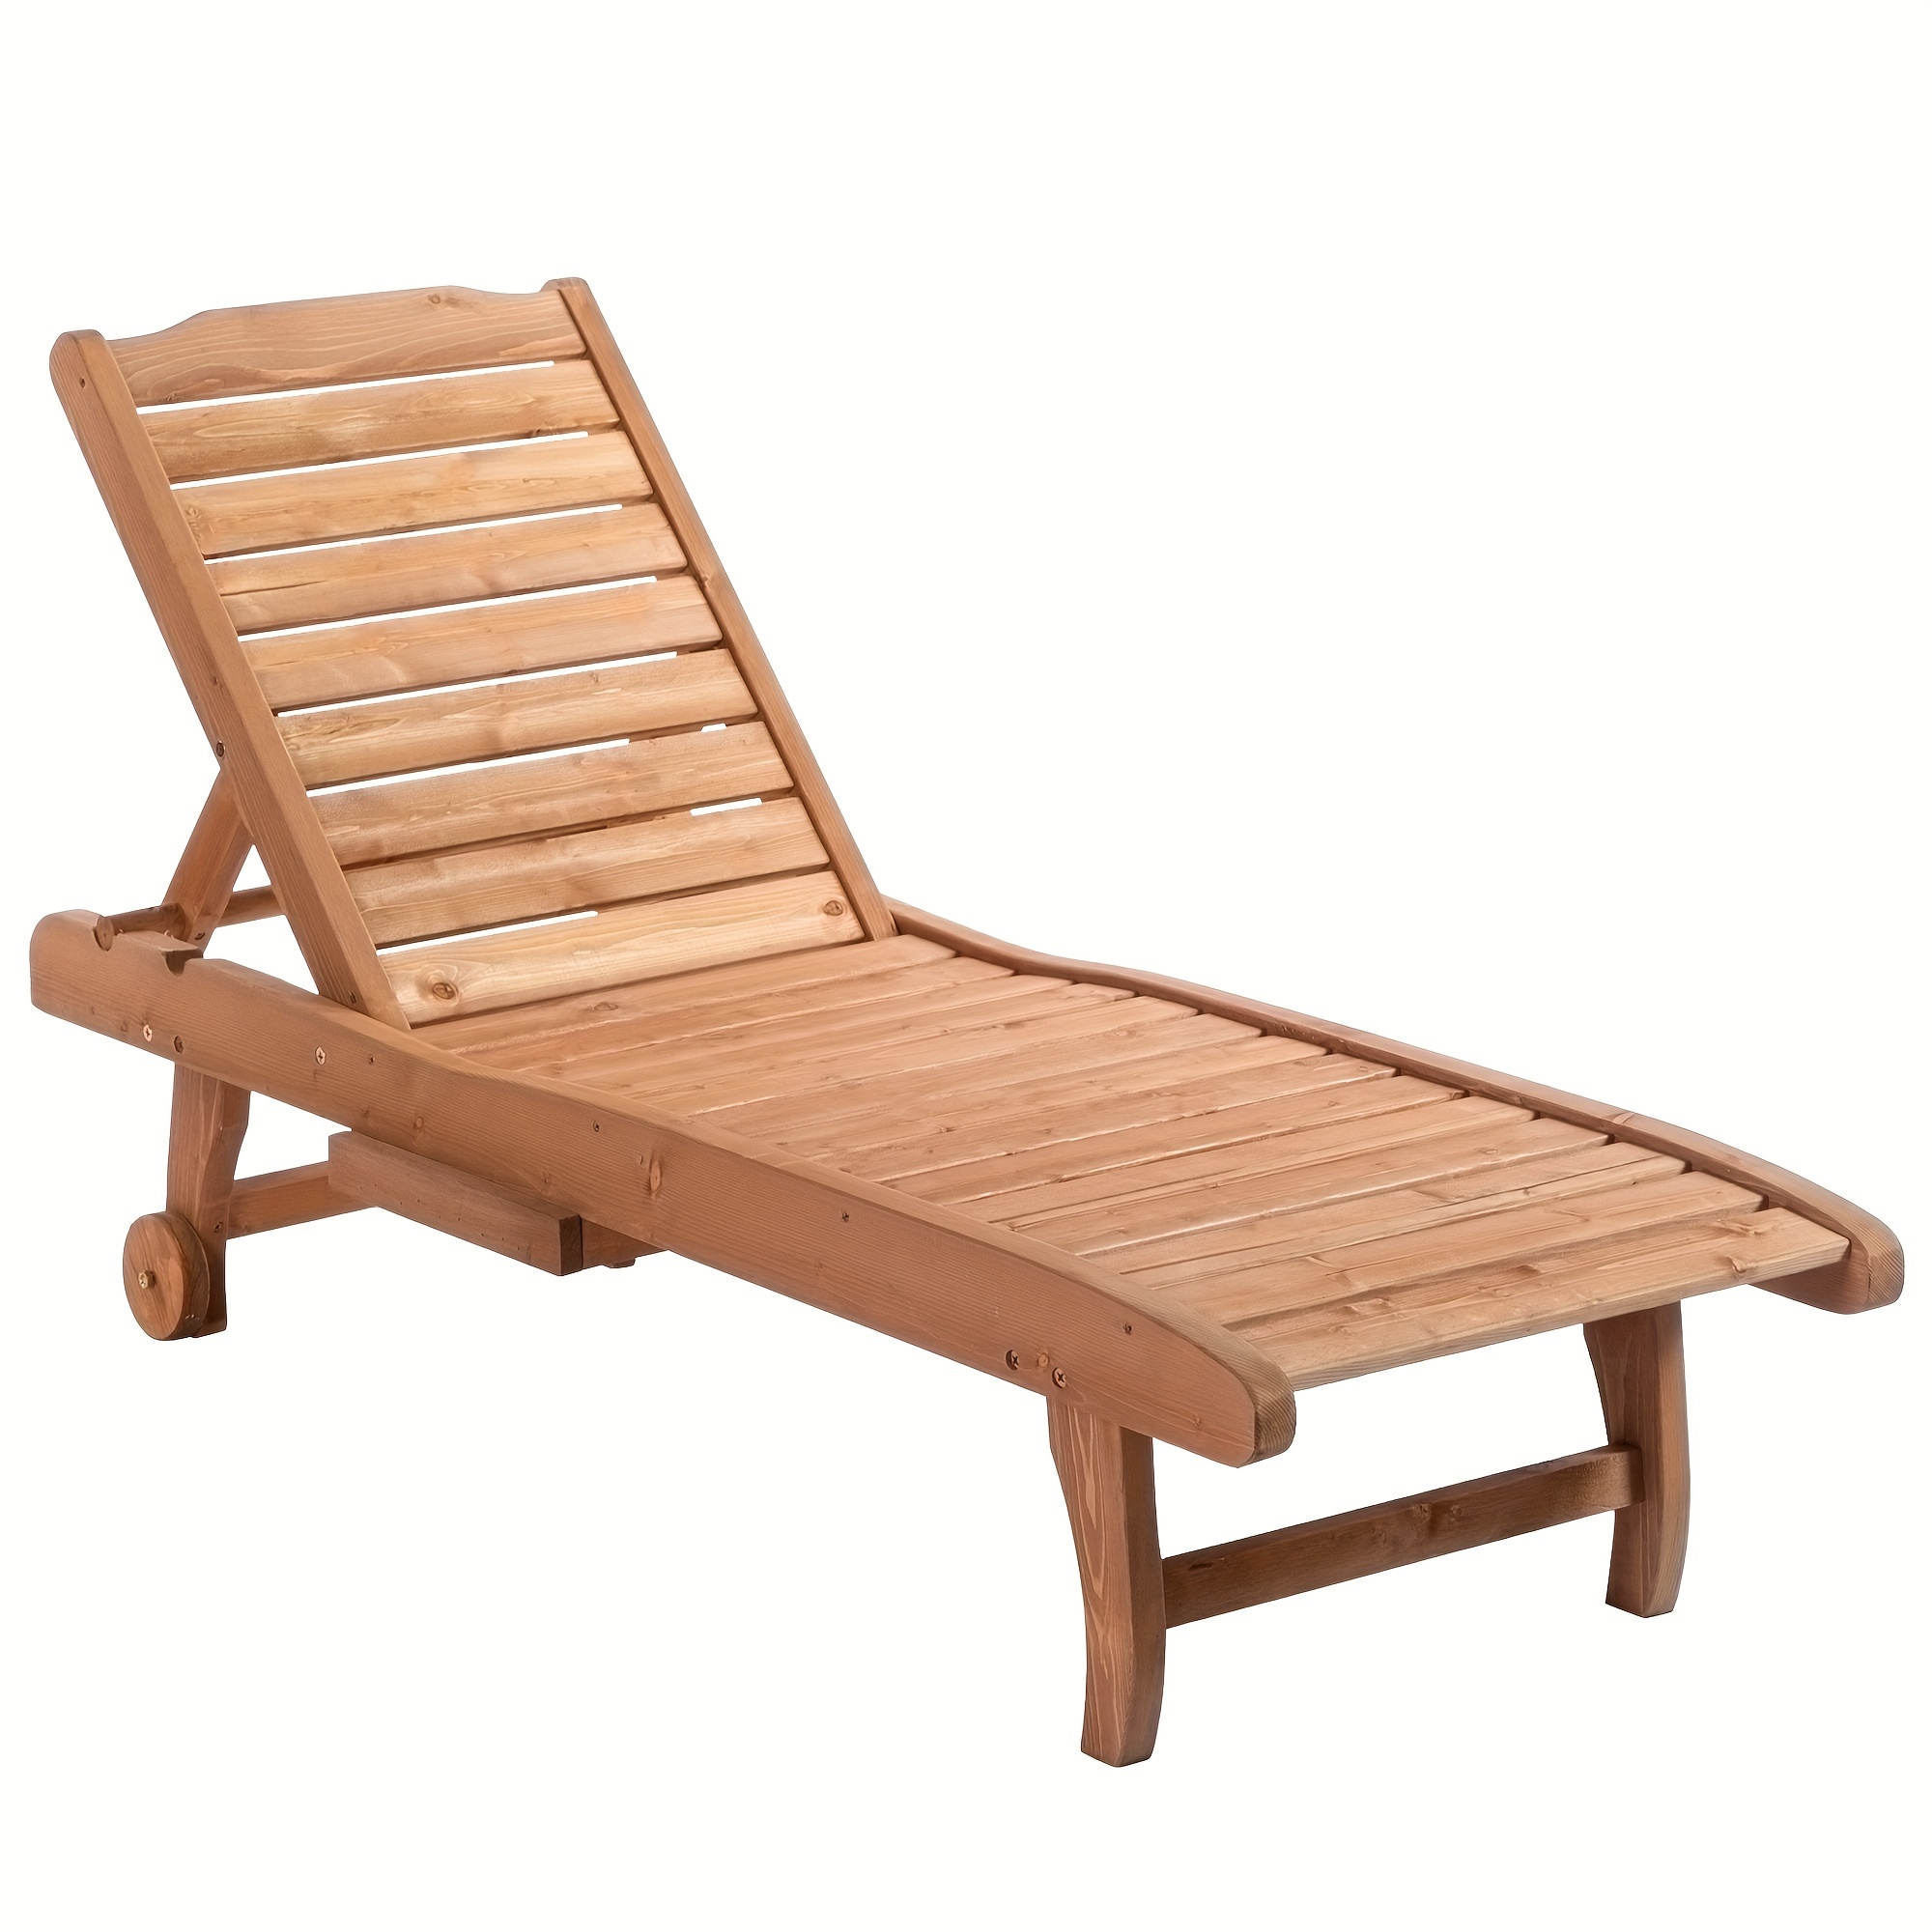 

Outdoor Chaise Lounge Pool Chair, Built-in Table, Reclining Backrest For Sun Tanning/sunbathing, Rolling Wheels, Red Wood Look